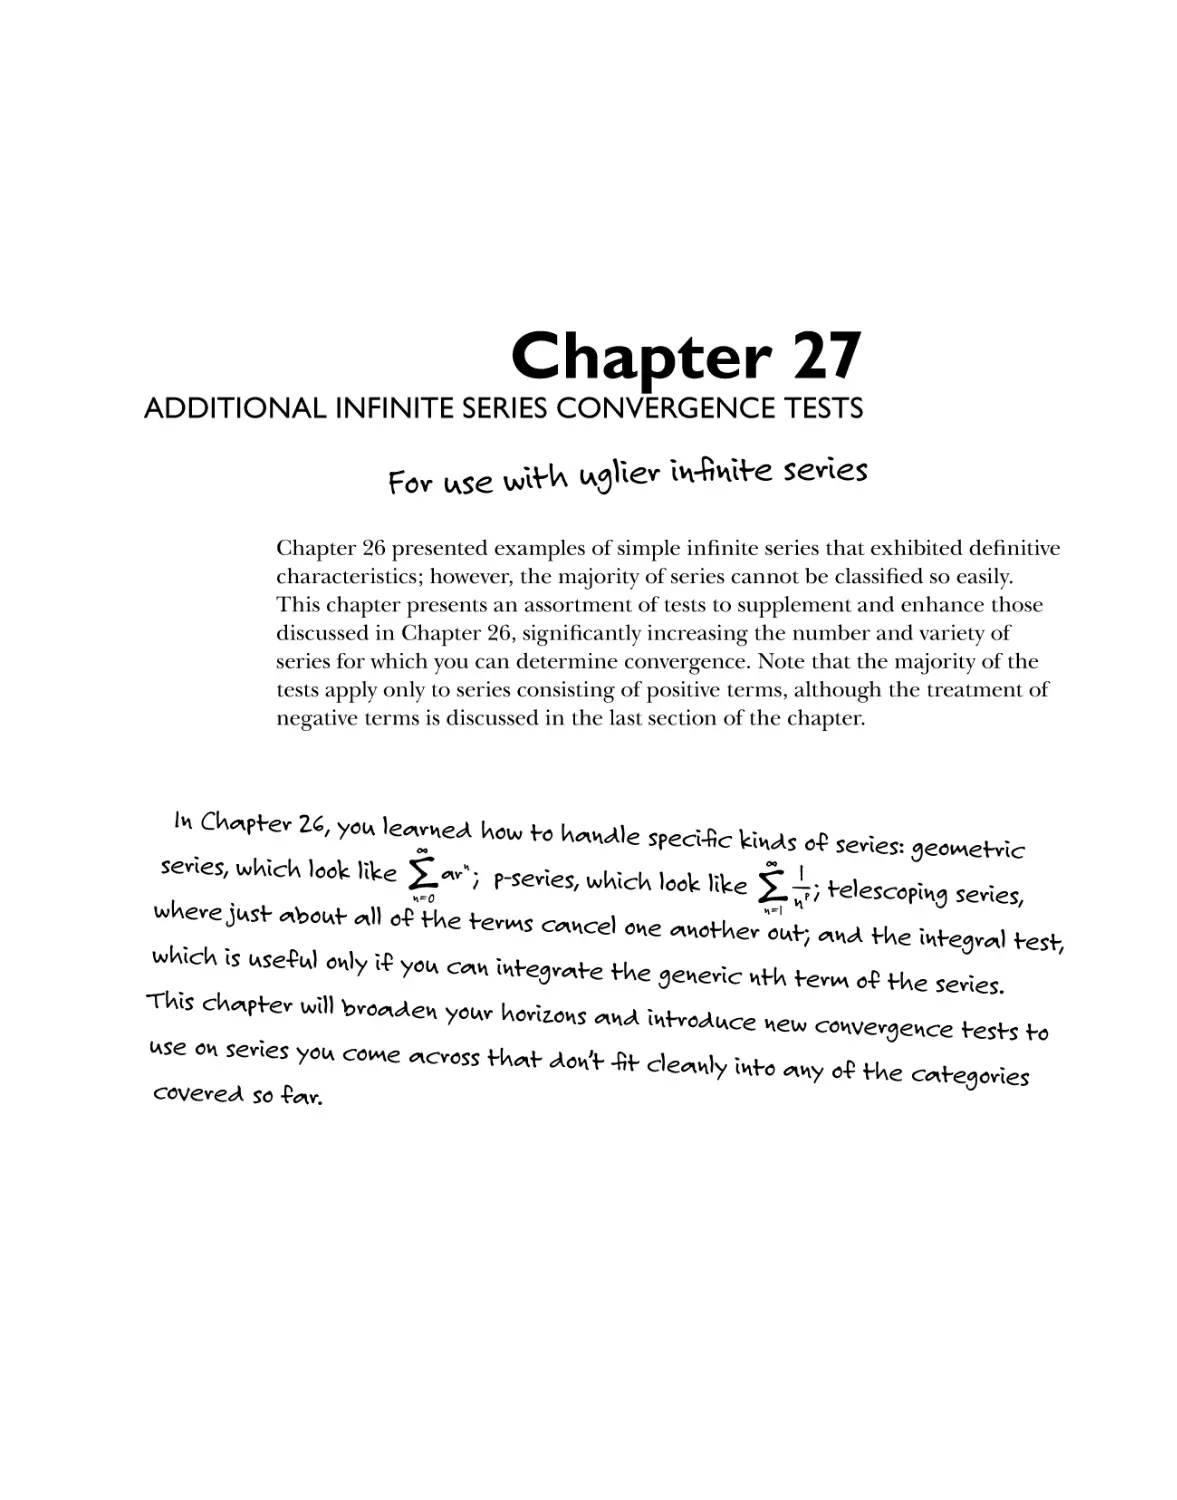 Chapter 27: Additional Infinite Series Convergence Tests 511